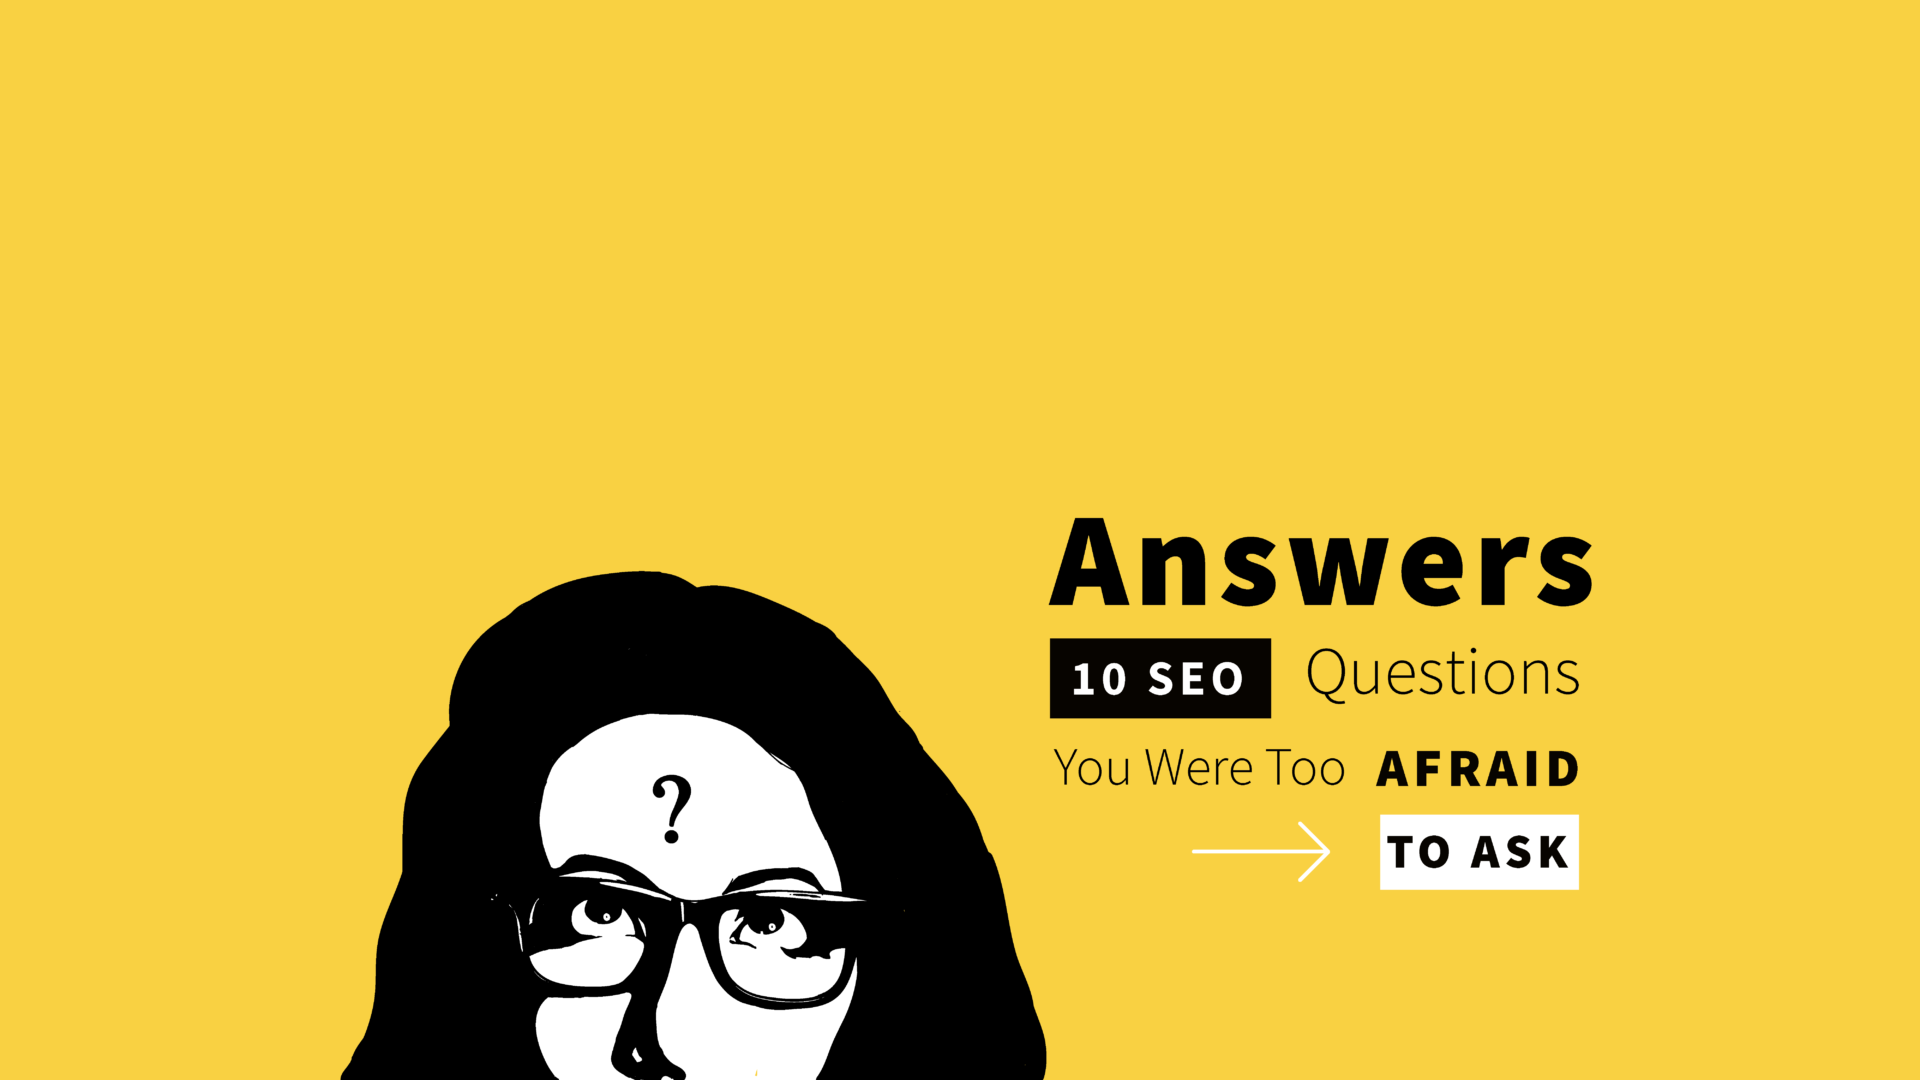 Answers to 10 SEO Questions You Might Have But Were Too Afraid to Ask Your CMO